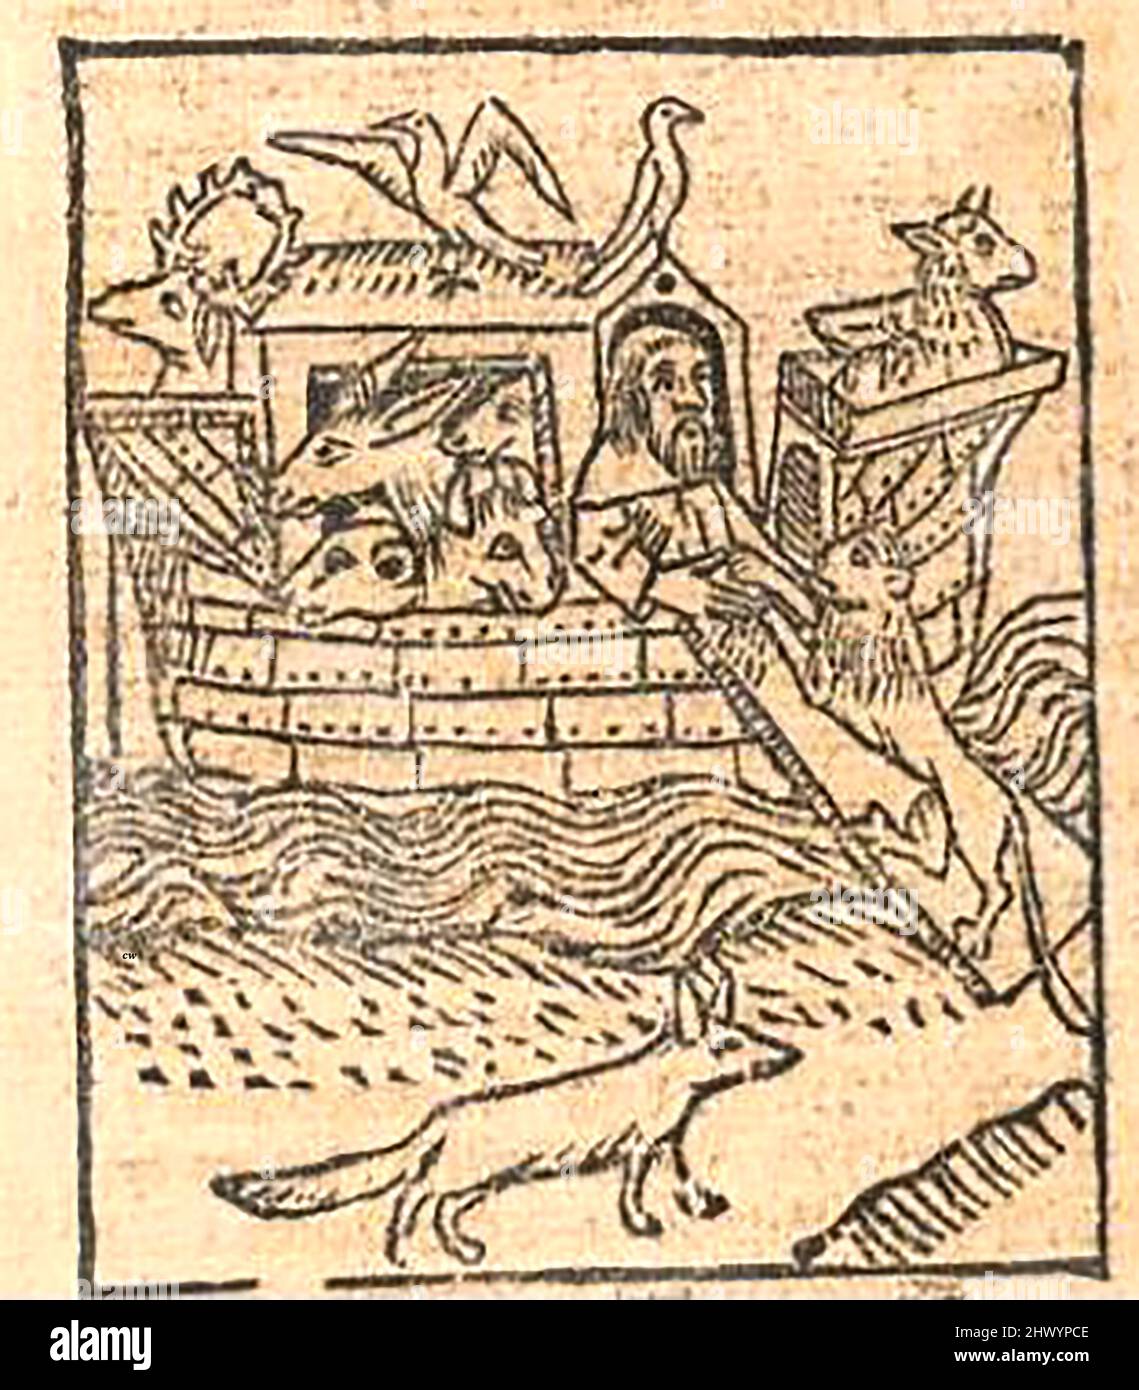 15th century woodcut showing the story of Noah and his ark printed by William Caxton ( 1422-1491/92) in his translation of  'The Golden Legend' or  'Thus endeth the legende named in Latyn legenda aurea that is to saye in Englysshe the golden legende' by Jacobus, de Voragine, (Circa 1229-1298). Stock Photo